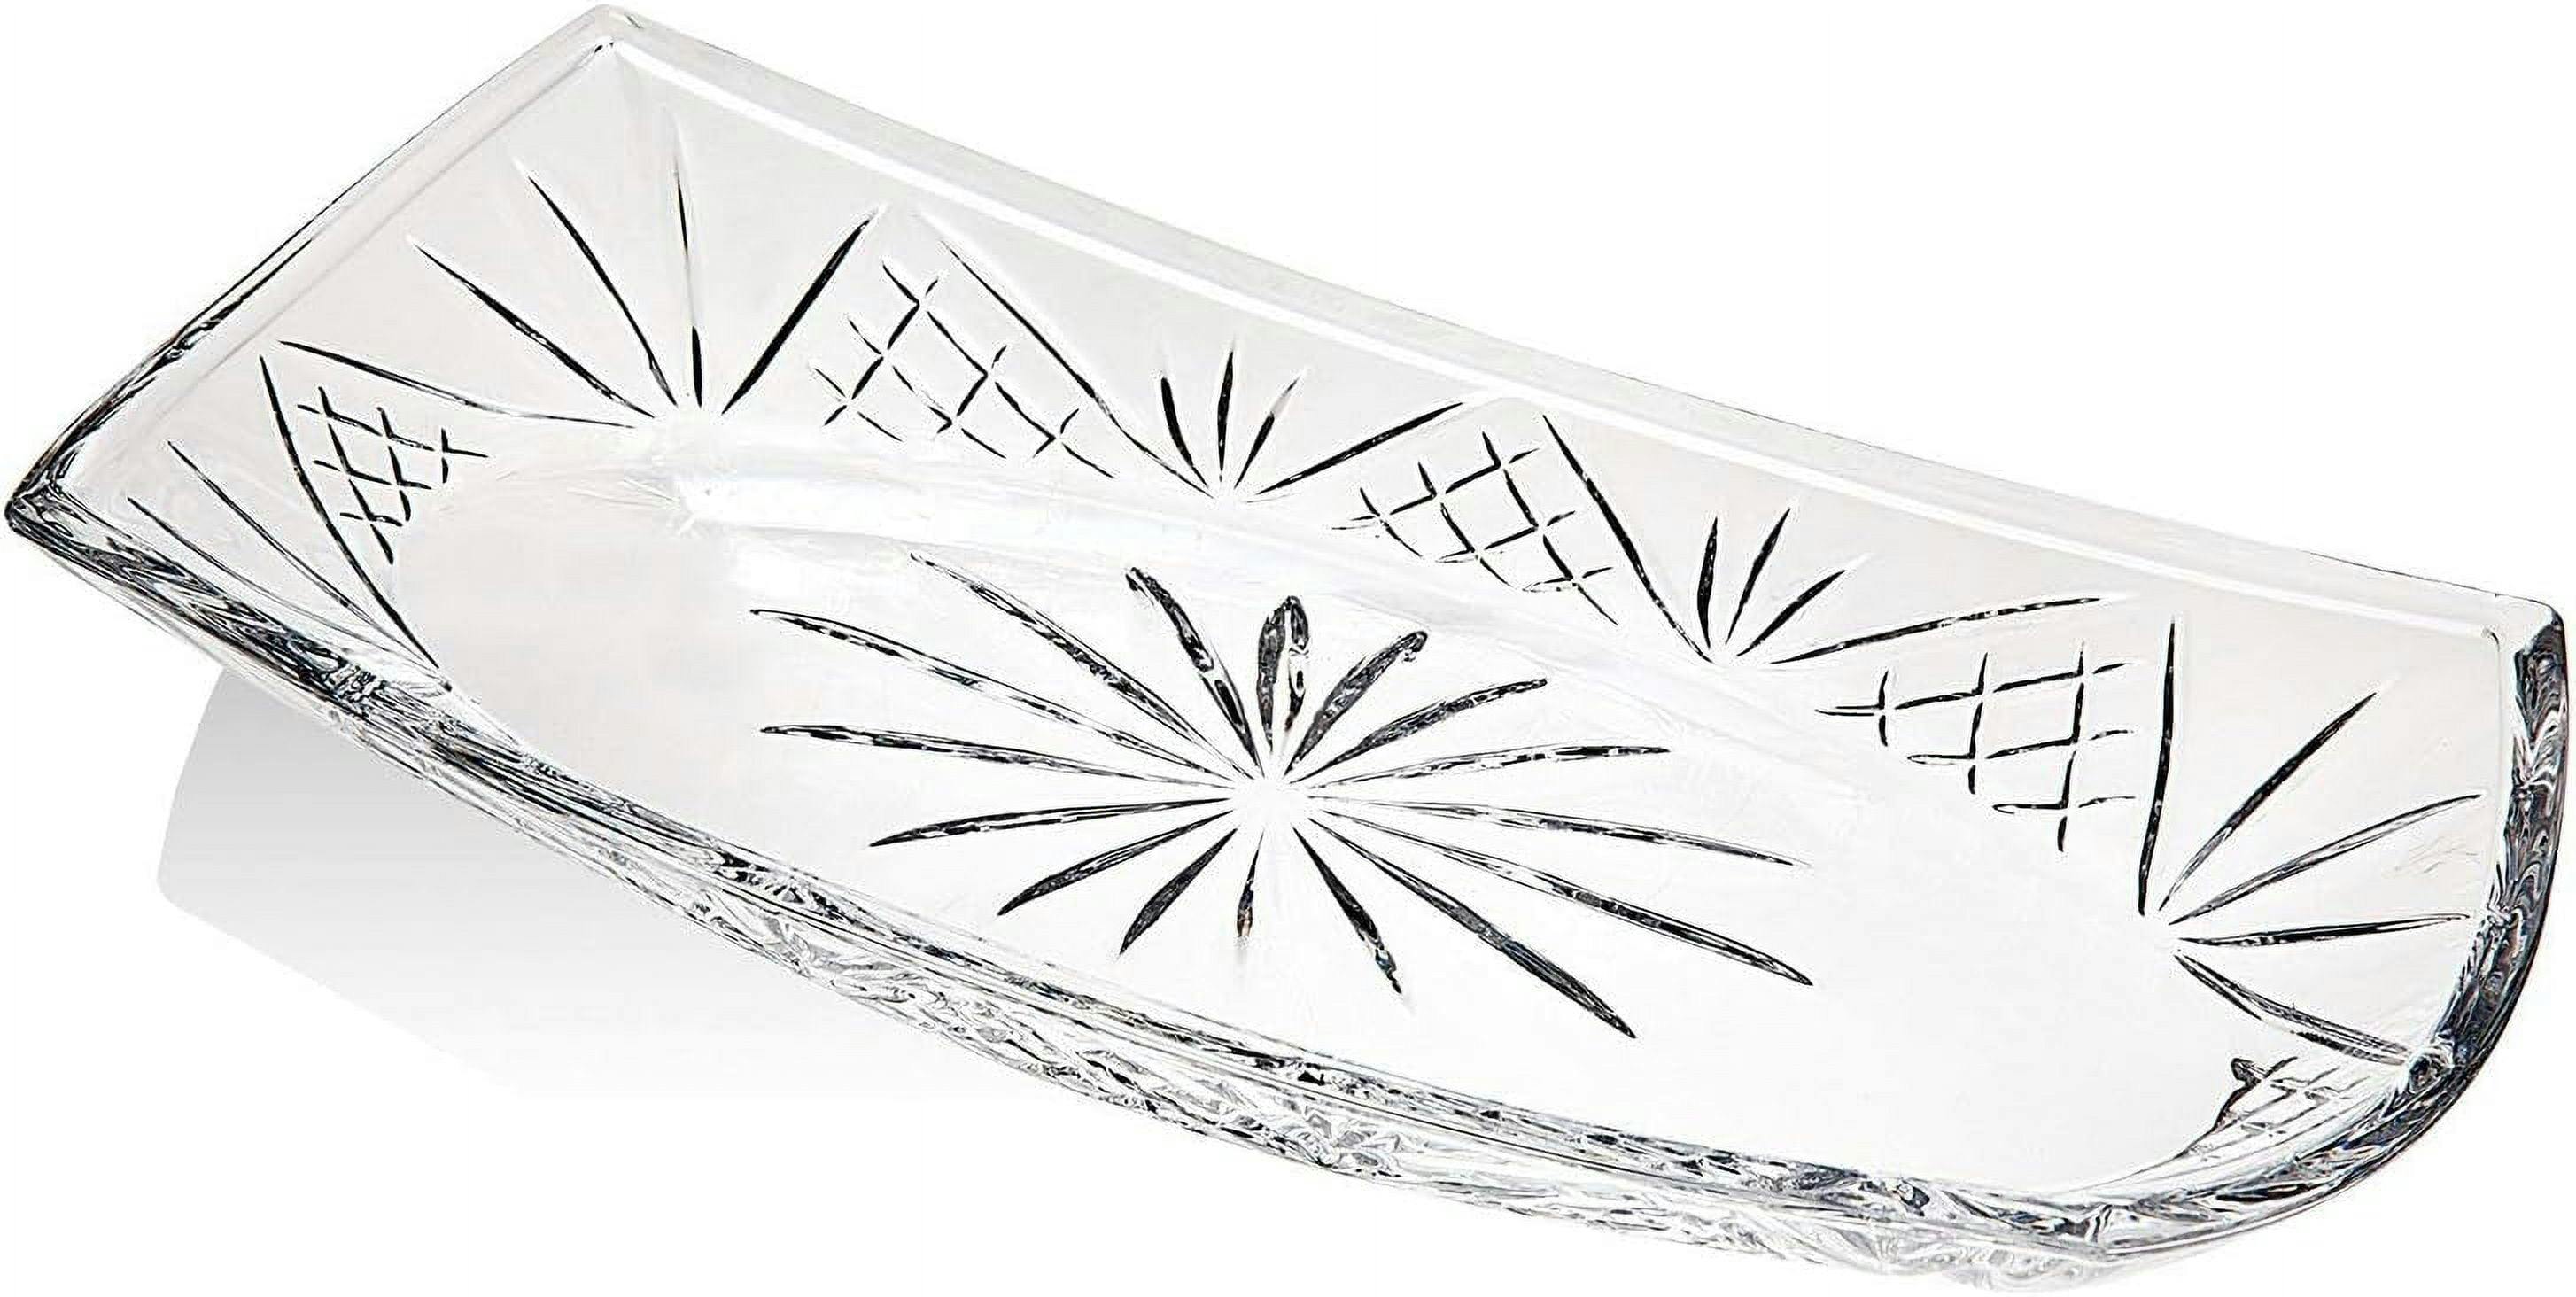 Elegant Modern 12" Clear Glass Oval Serving Tray